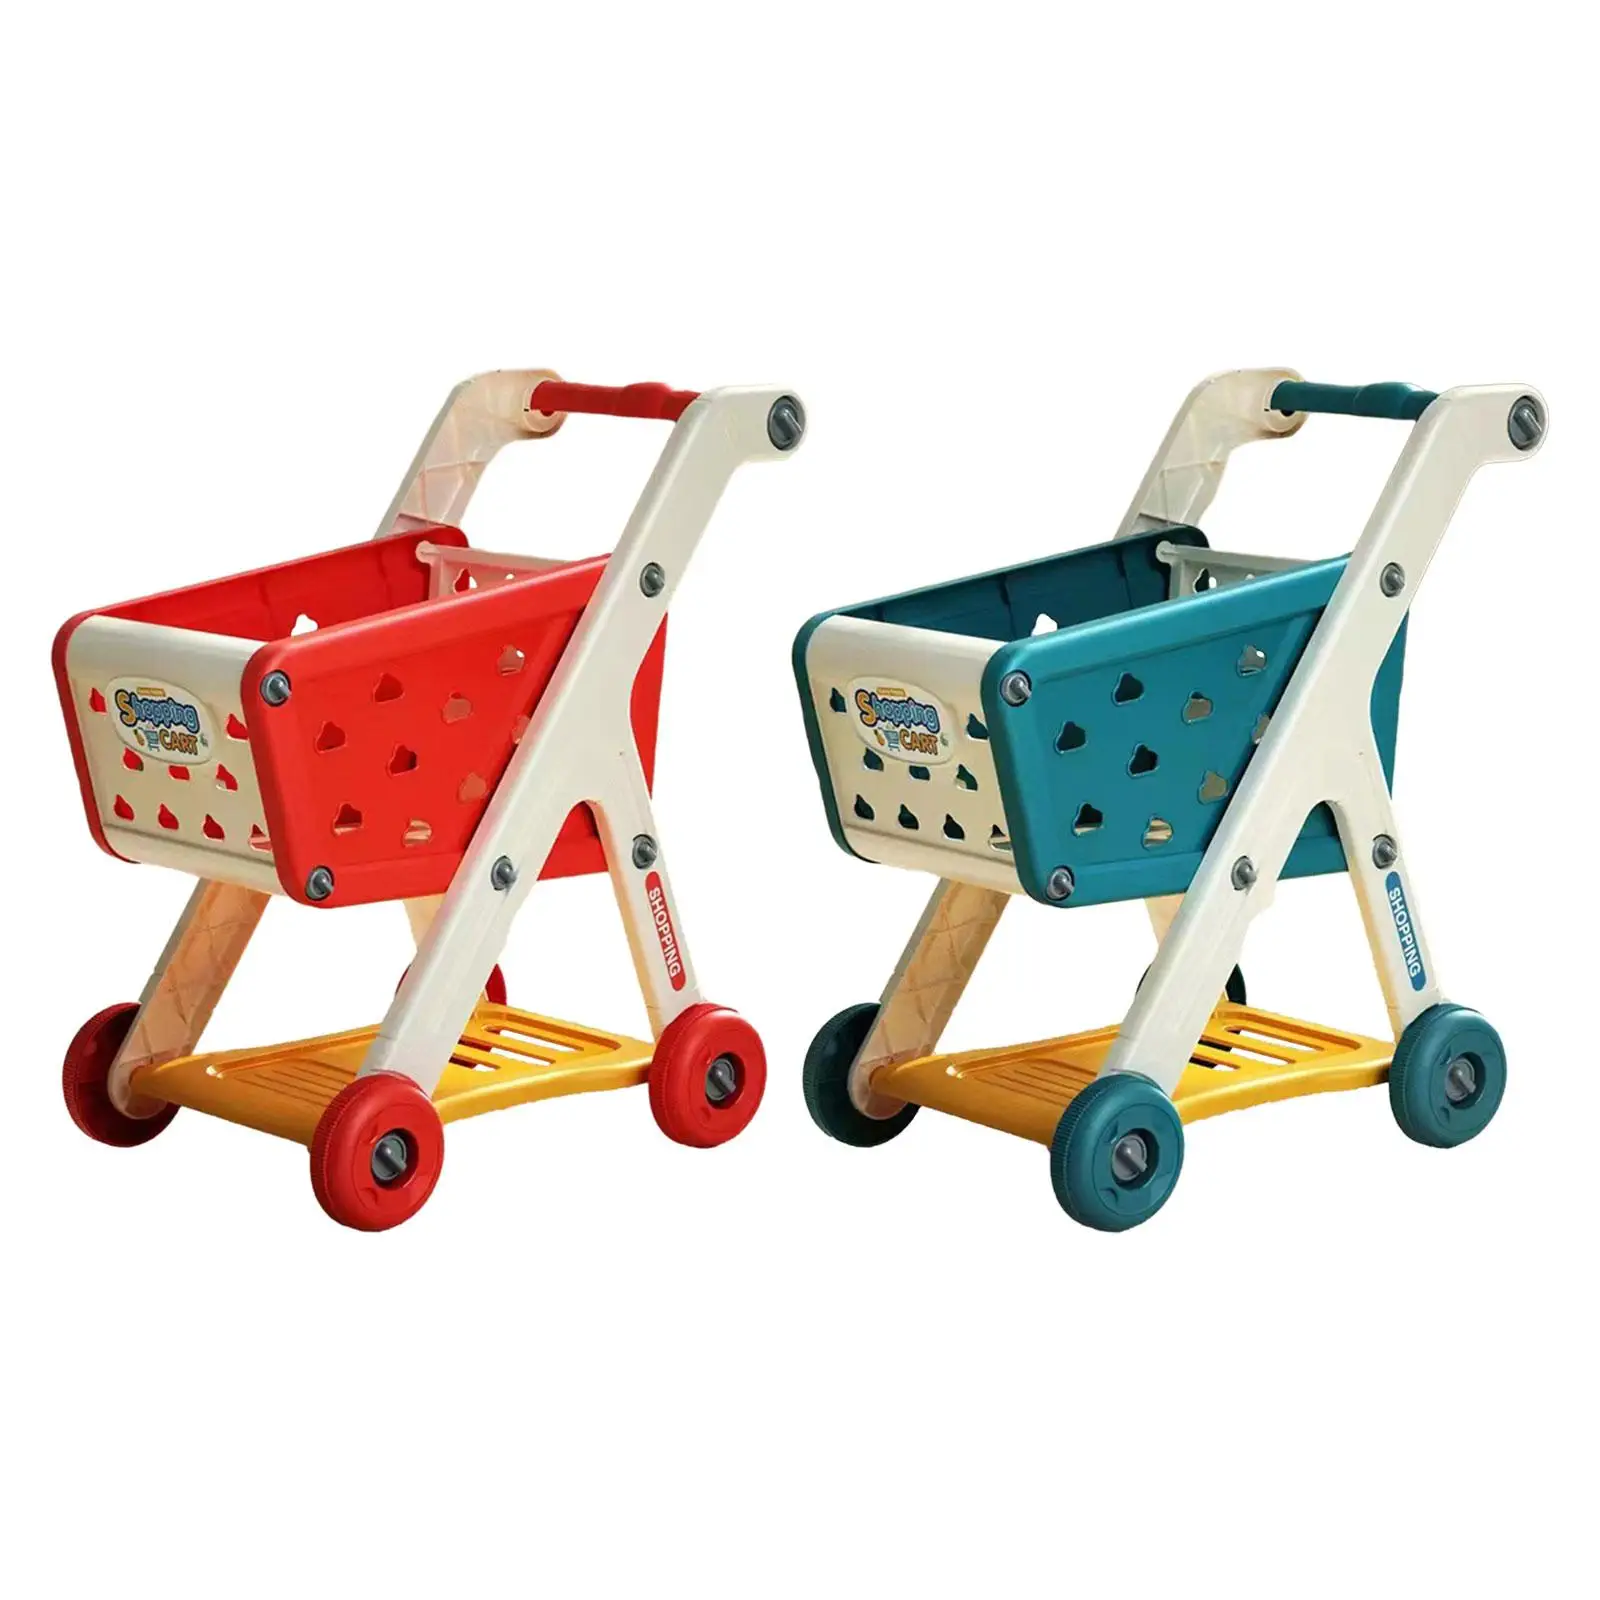 Kids Shopping Cart Toy Easy to Push Shopping Trolley Toy for Ages 3 and up Girls and Boys Preschool Birthday Gift Party Favors